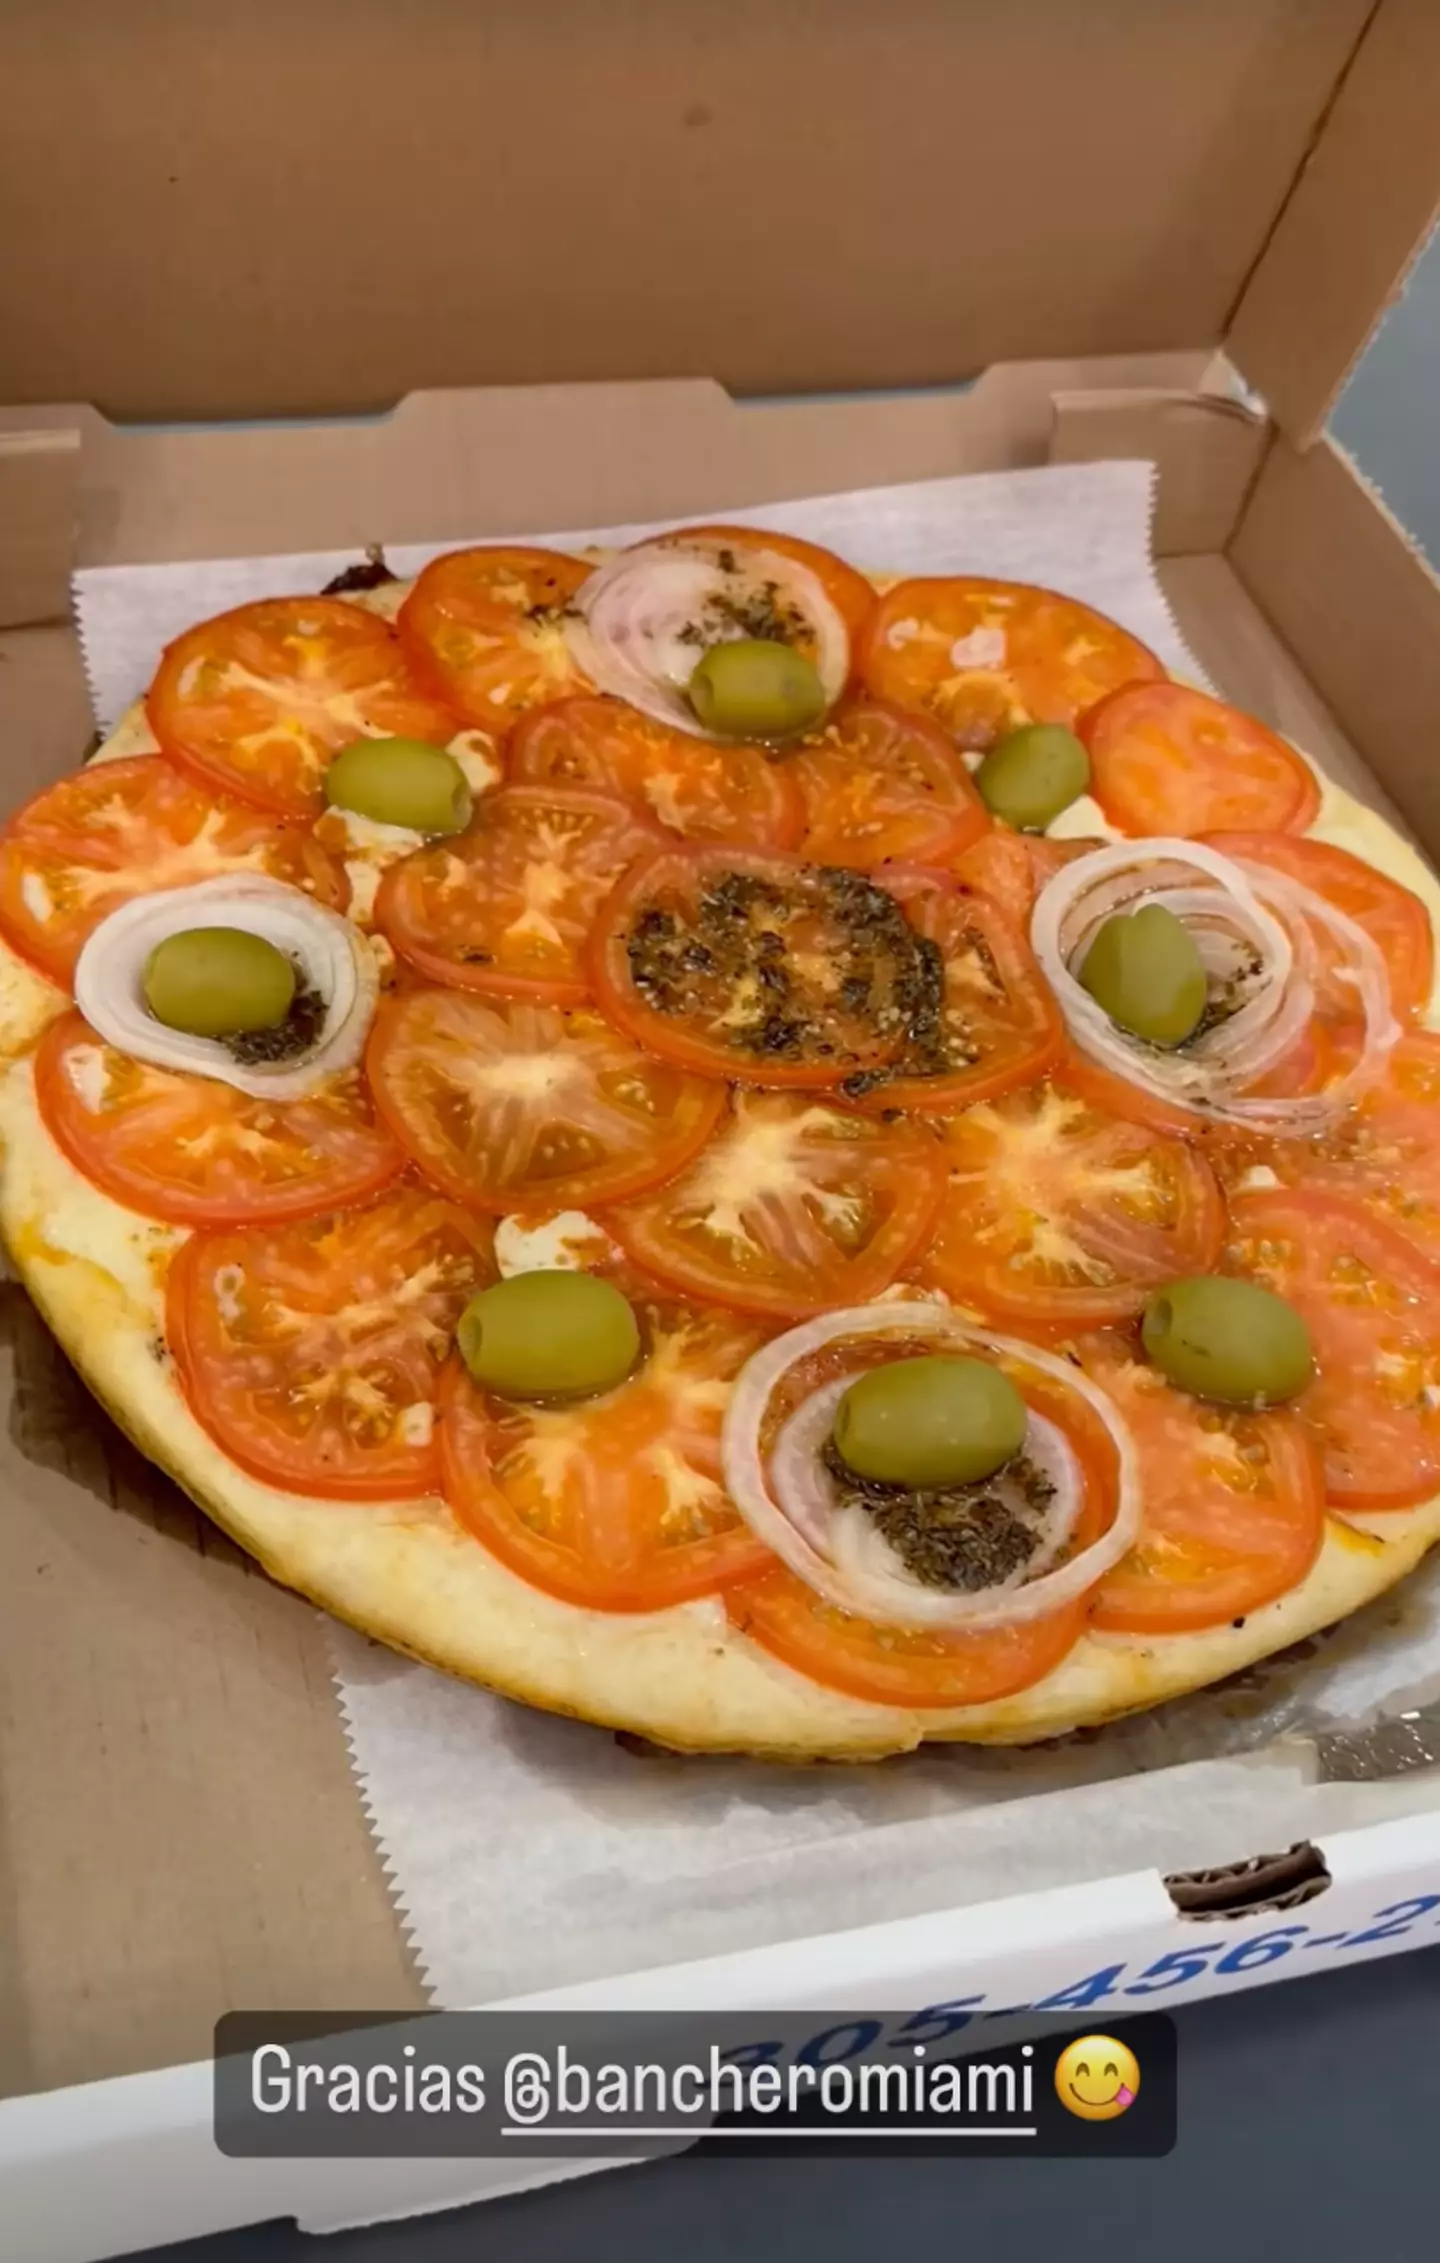 Lionel Messi's pizza order has caught the attention of social media users.